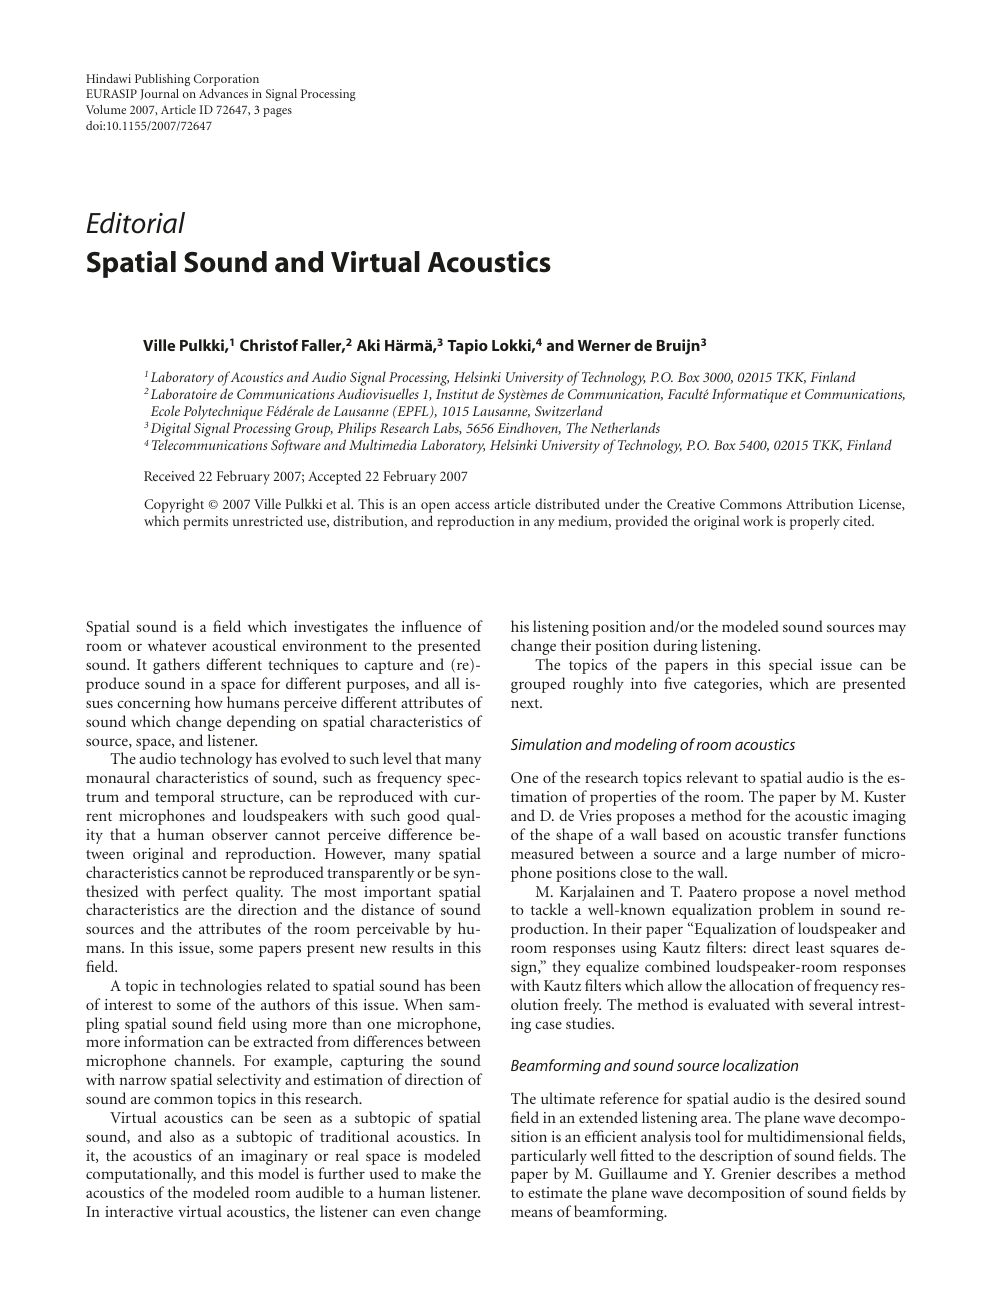 Spatial Sound and Virtual Acoustics – topic of research paper in Electrical  engineering, electronic engineering, information engineering. Download  scholarly article PDF and read for free on CyberLeninka open science hub.